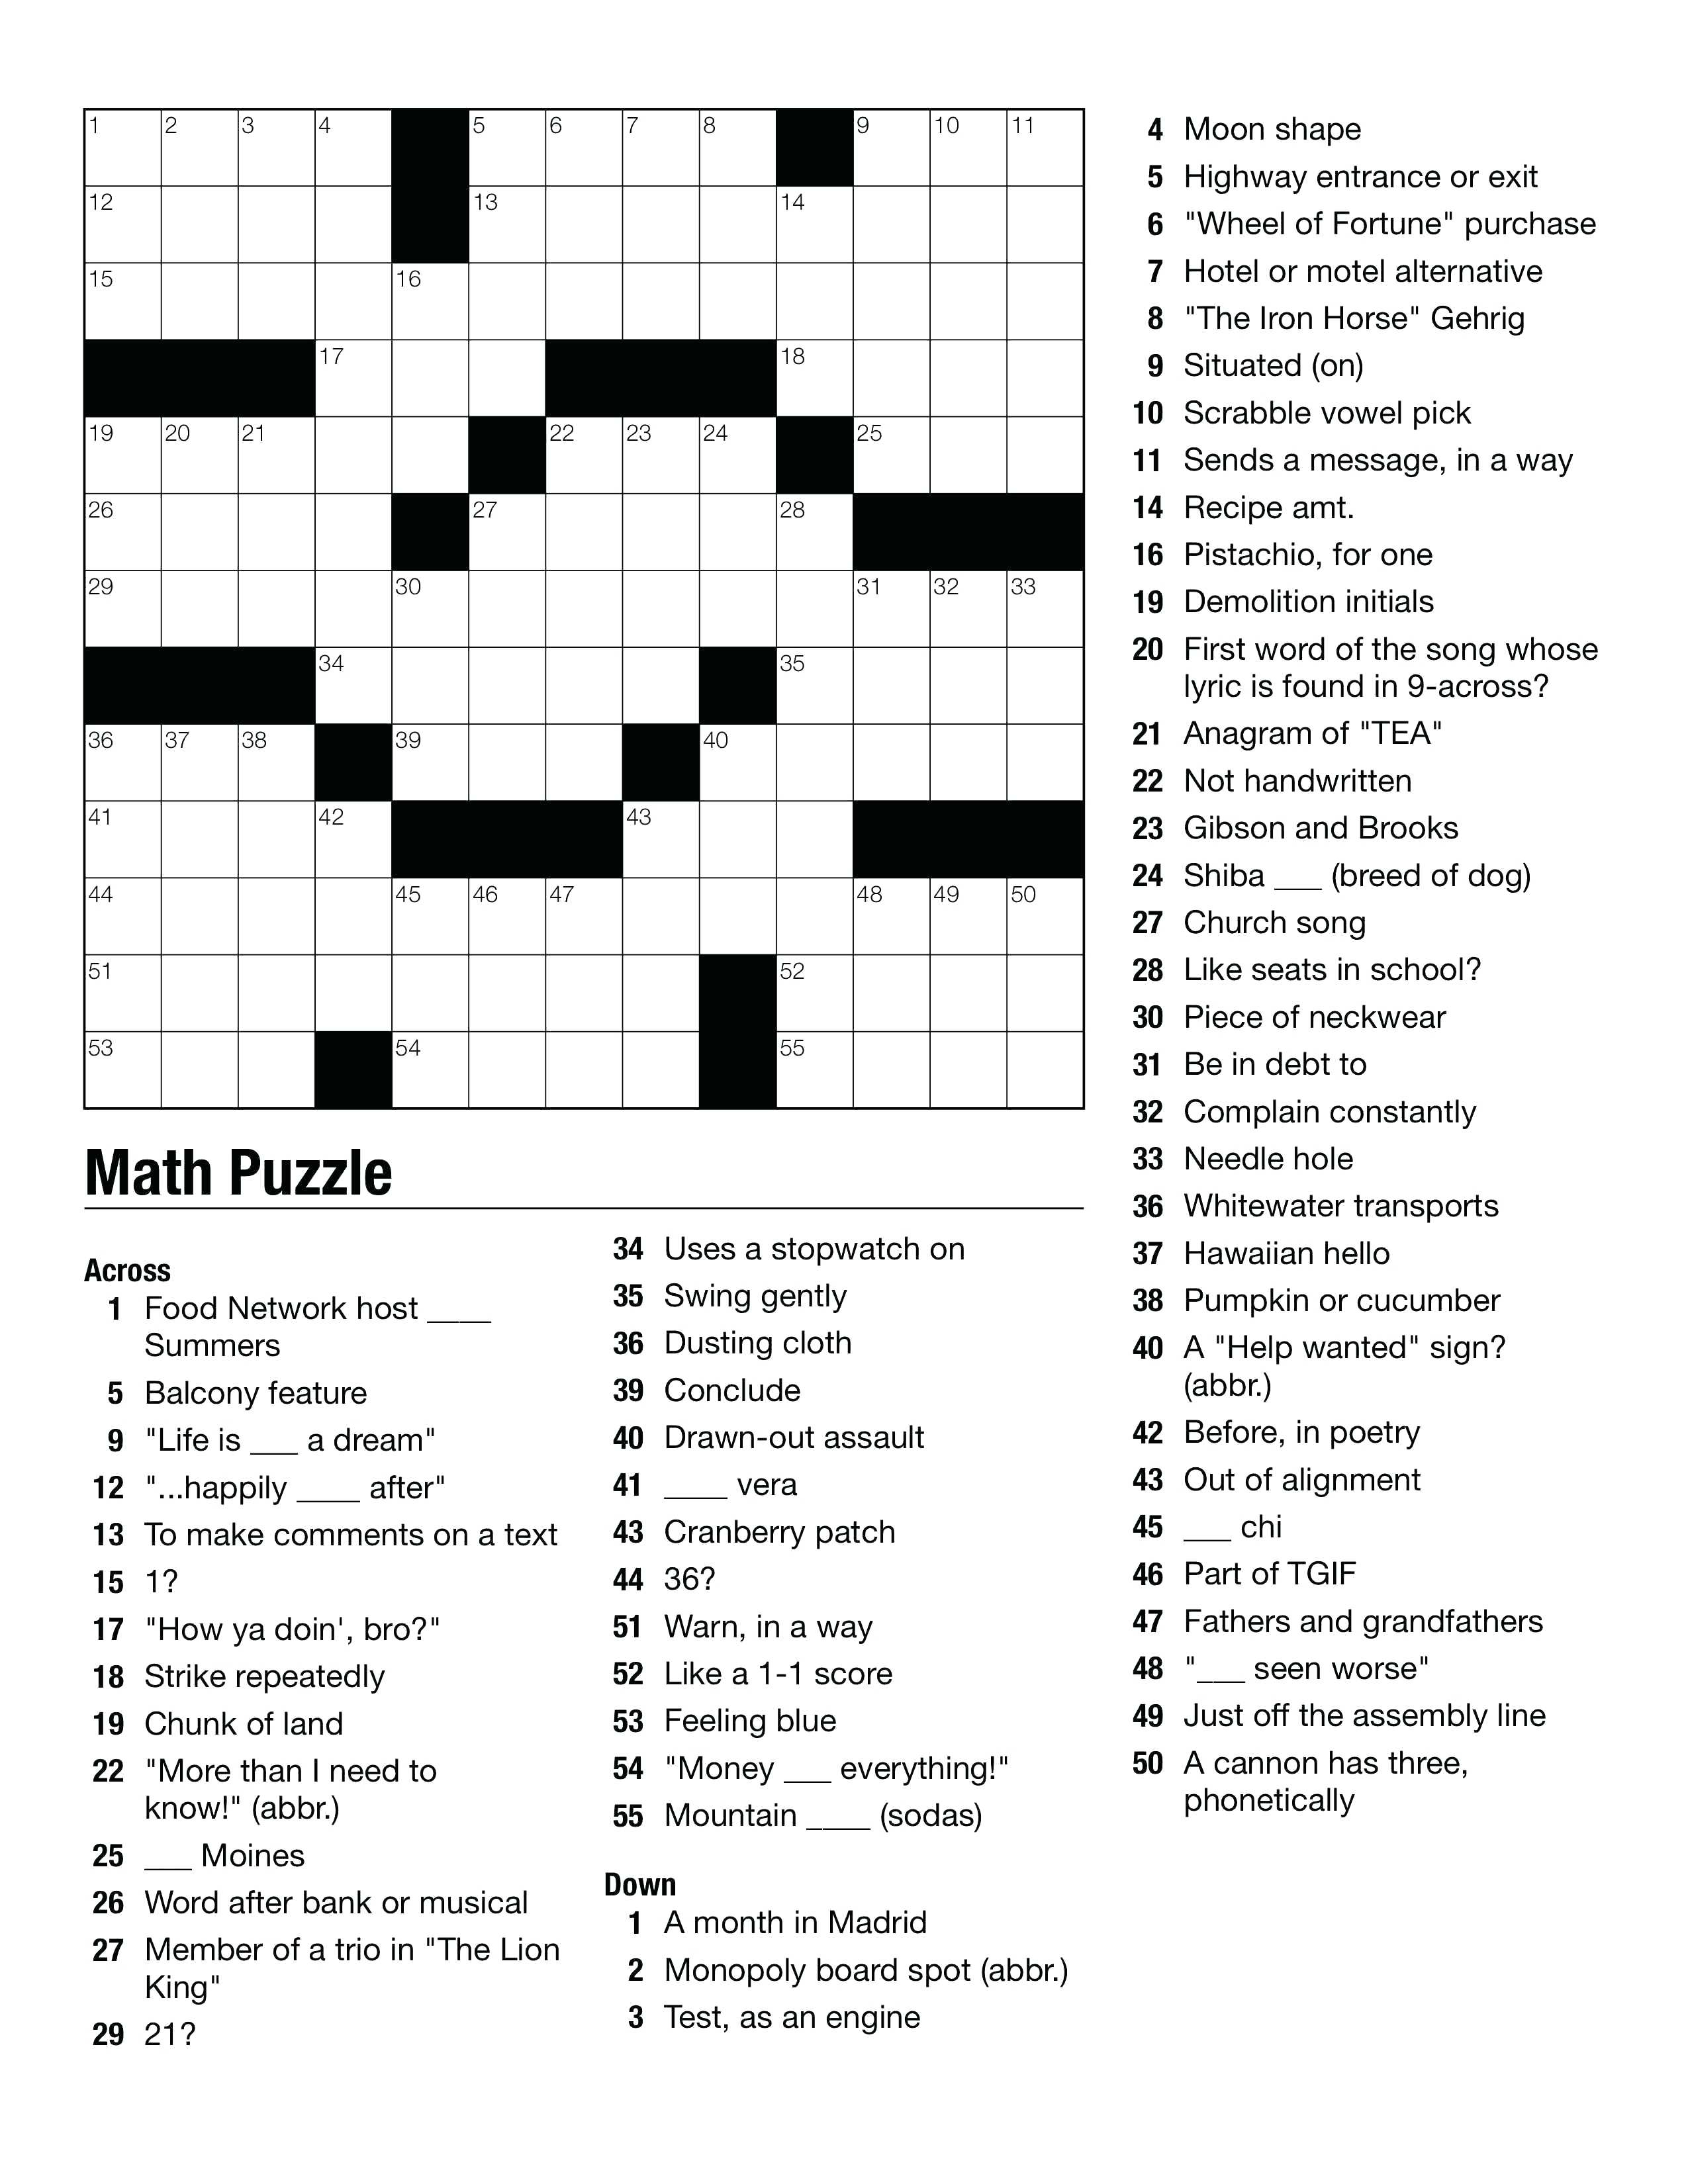 Geometry Puzzles Math Geometry Images Teaching Ideas On Crossword - Printable Math Crossword Puzzles For High School